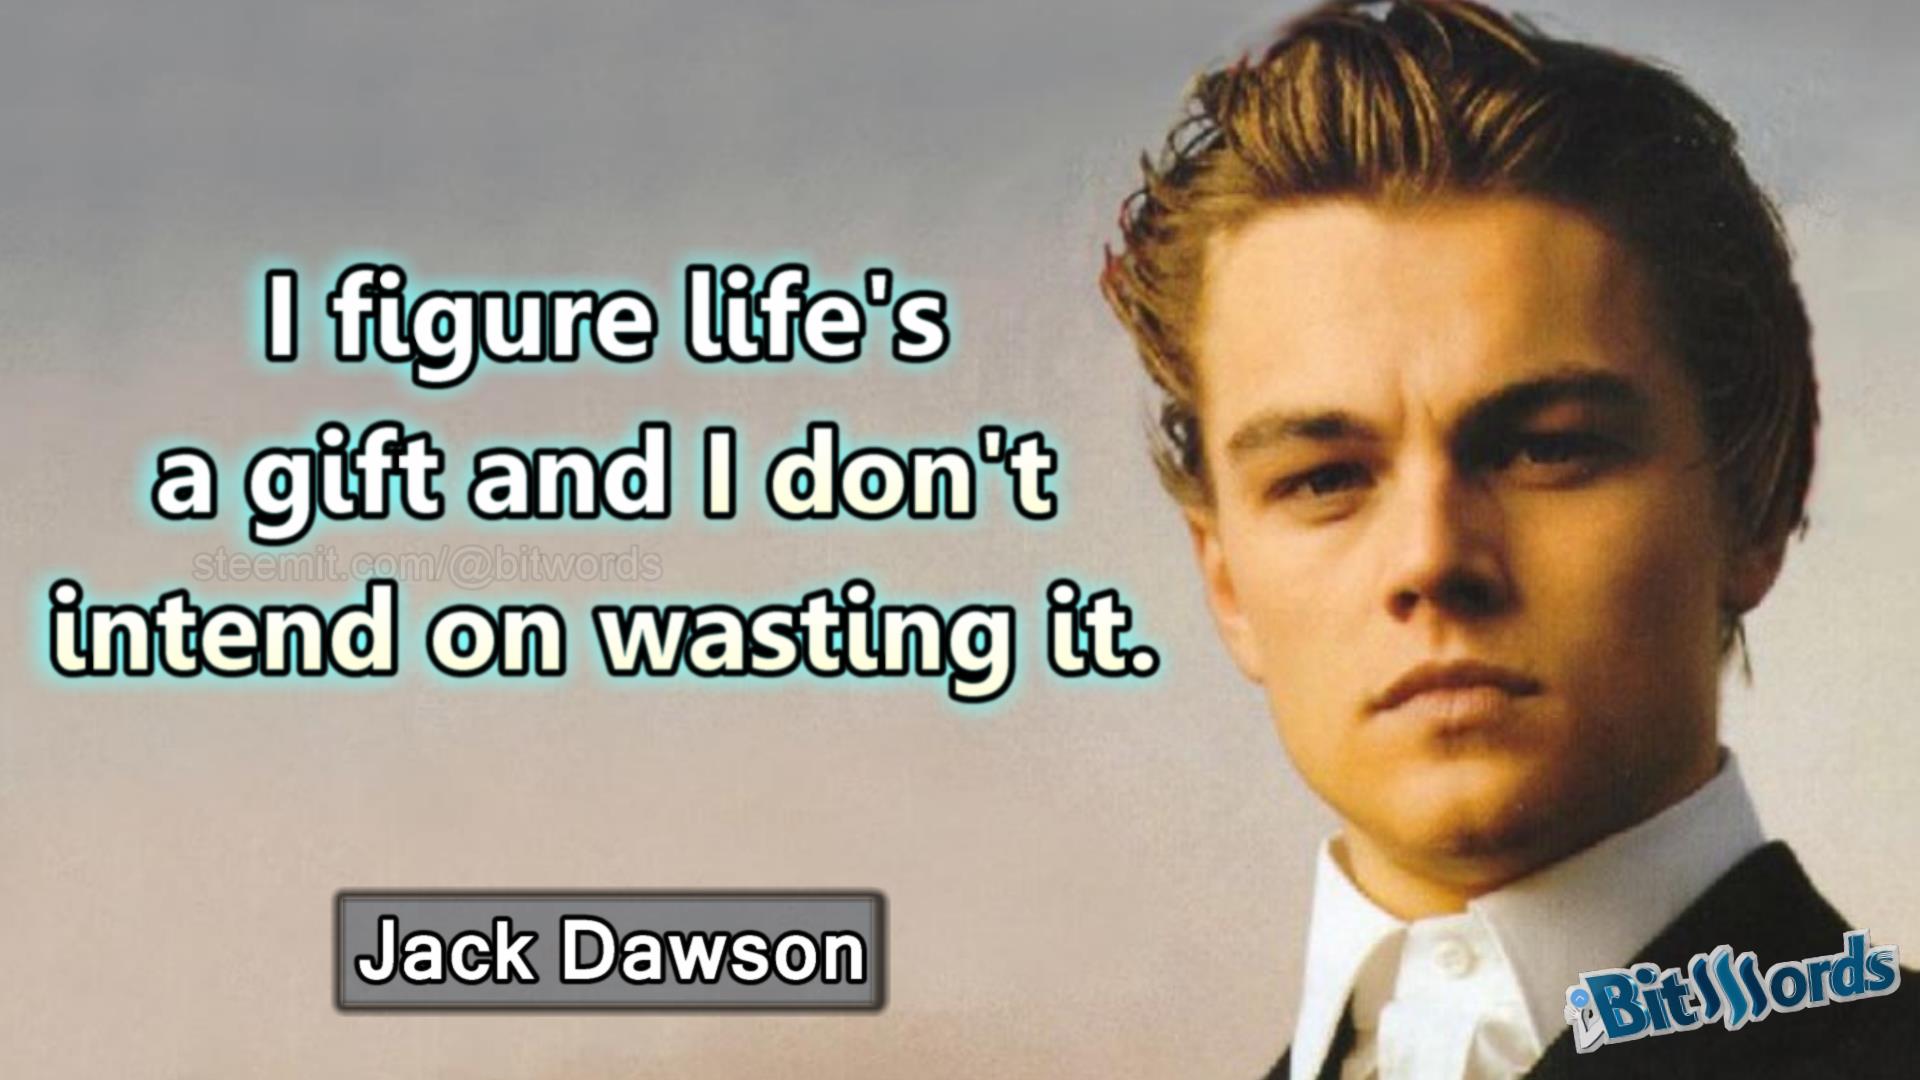 Movie Quote of the Day / Jack Dawson - Life is a gift, don't waste it —  Steemit